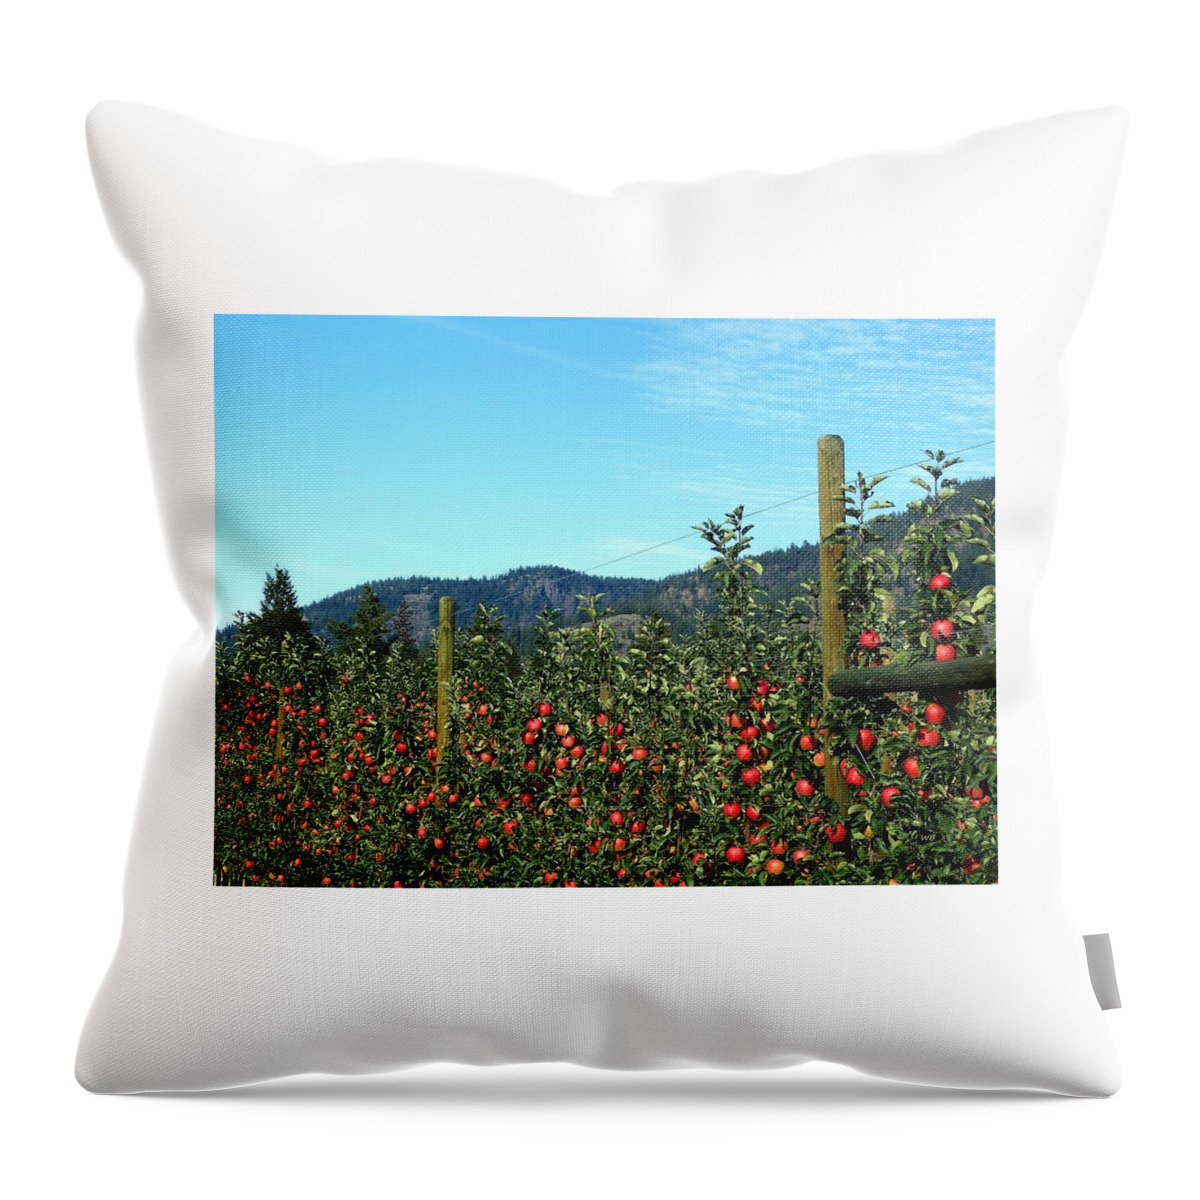 Apples Throw Pillow featuring the photograph Ready For Harvest by Will Borden